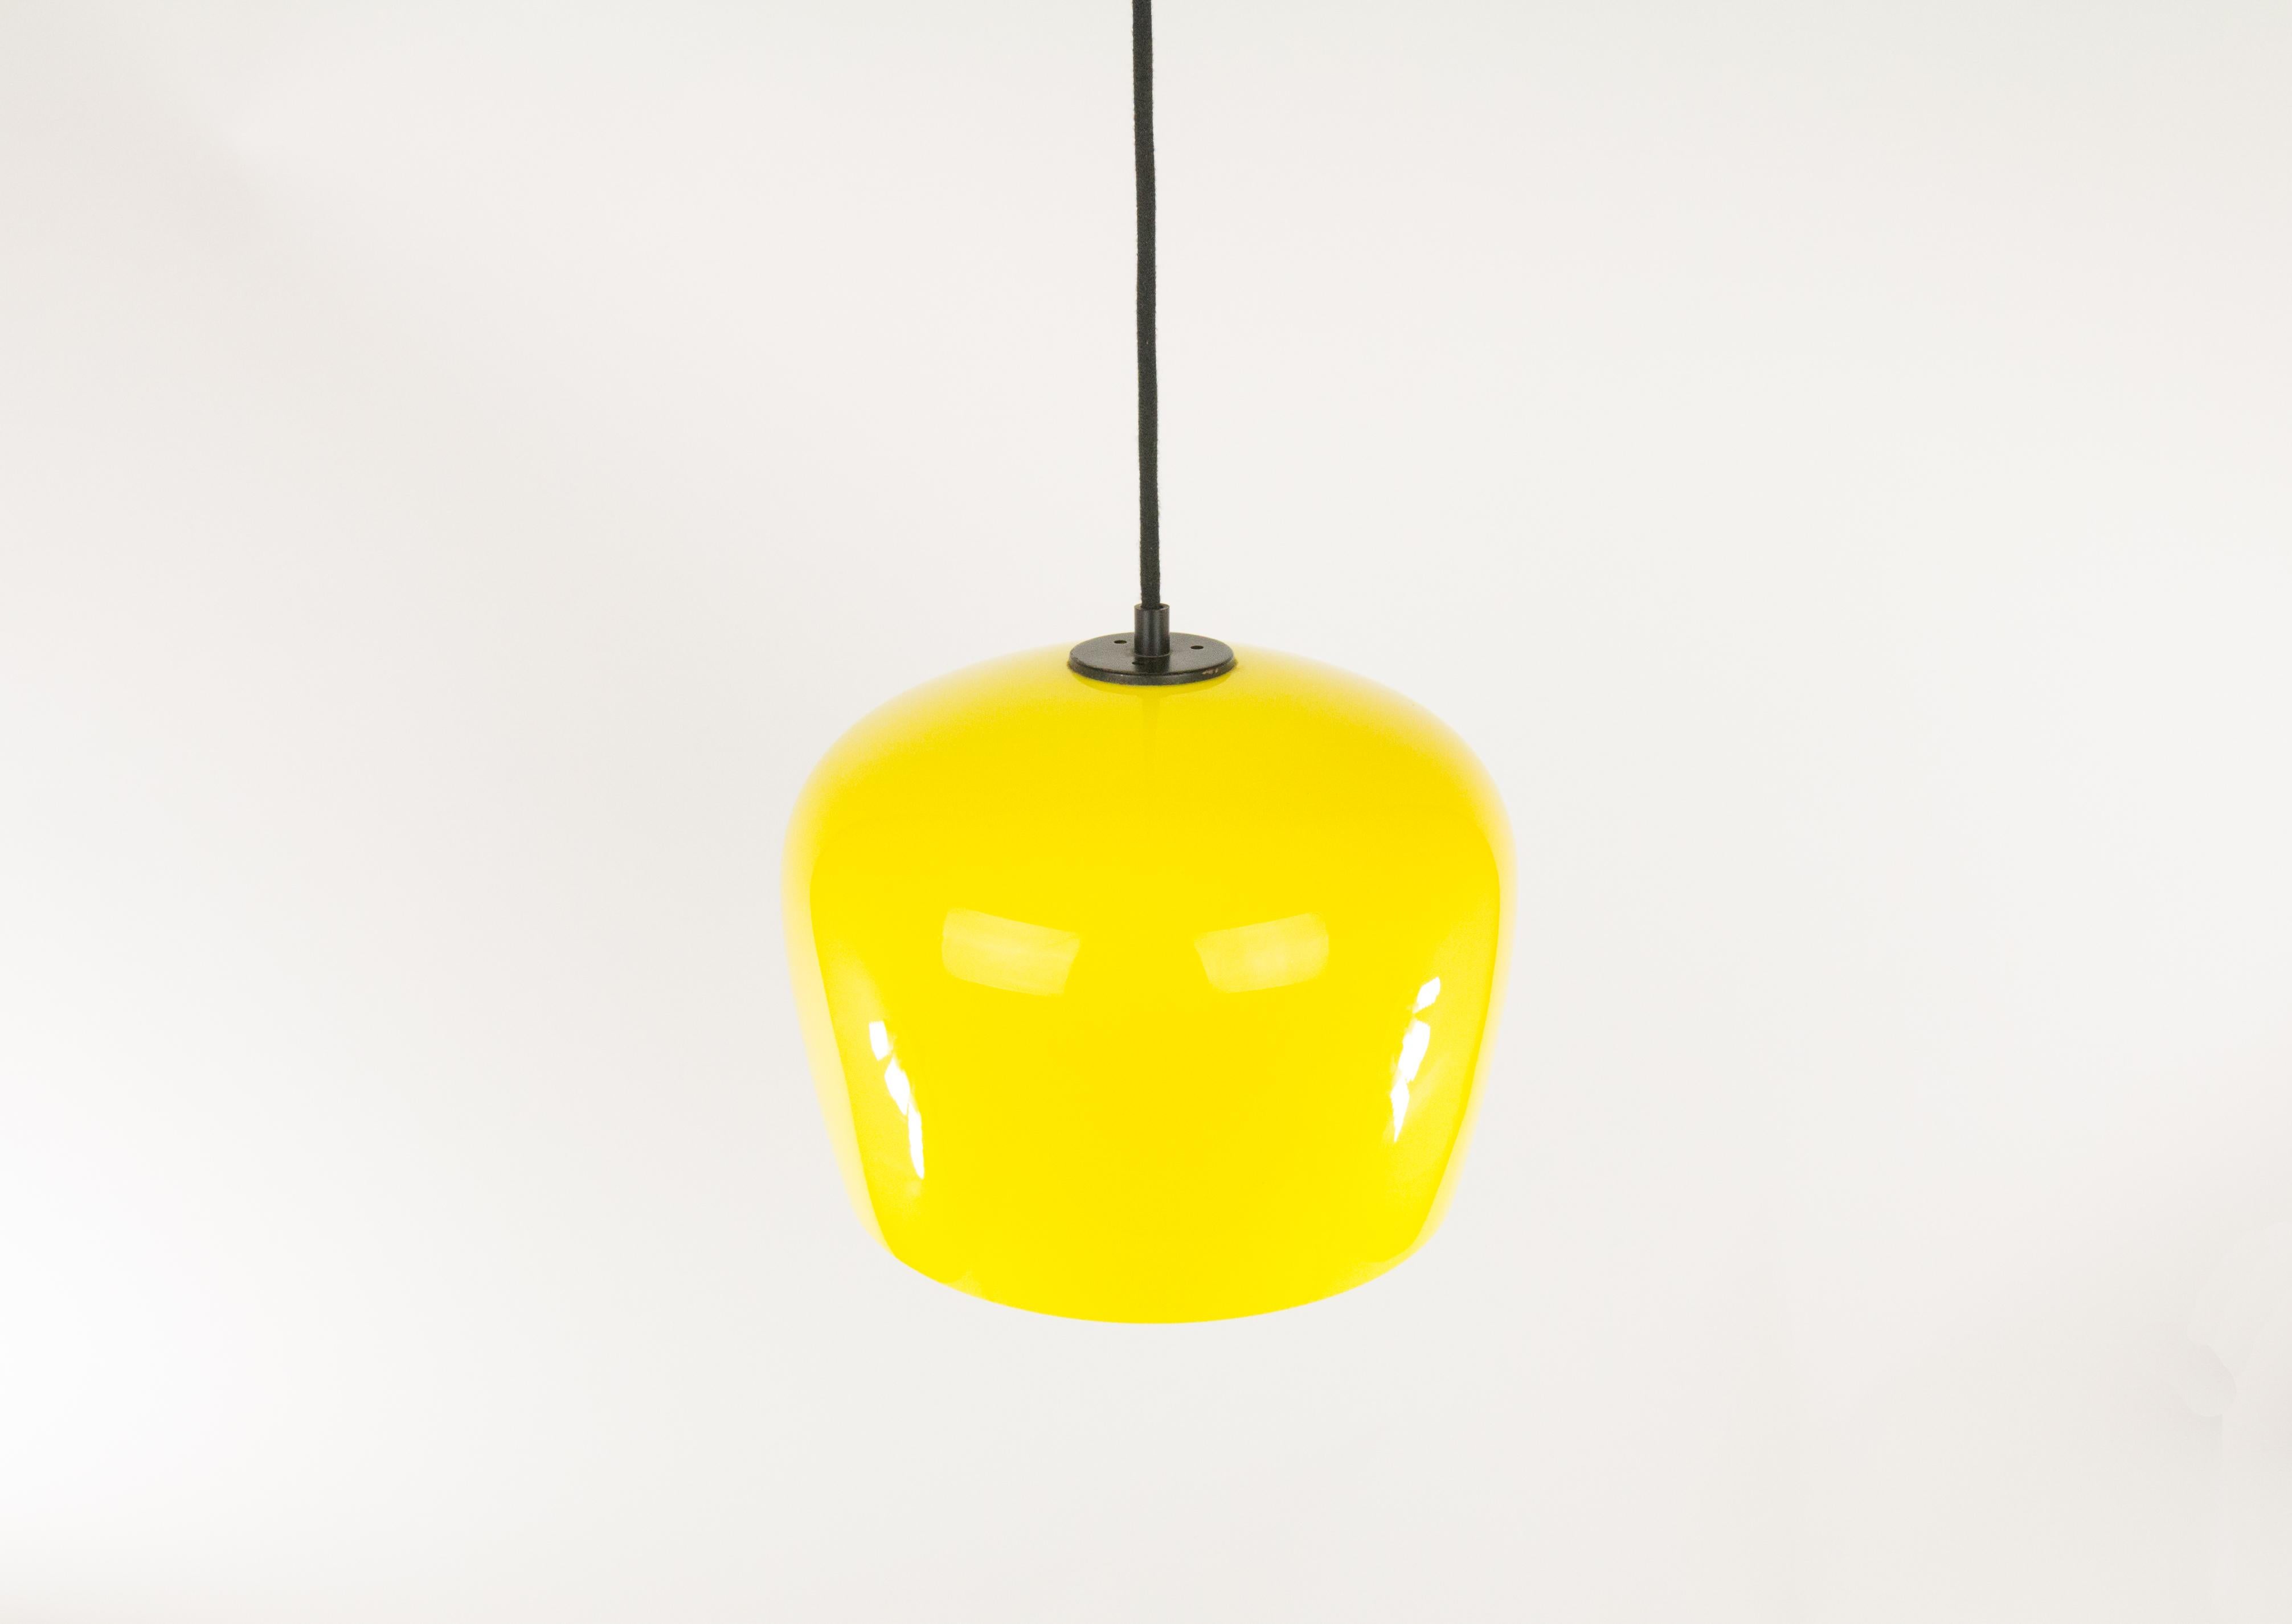 Striking yellow pendant by Alessandro Pianon for famous Venetian glassmaker Vistosi. It was designed in the 1960s.

The lamp was produced in three different colors: grey, orange and yellow. The glass is subtle and still in beautiful condition. The